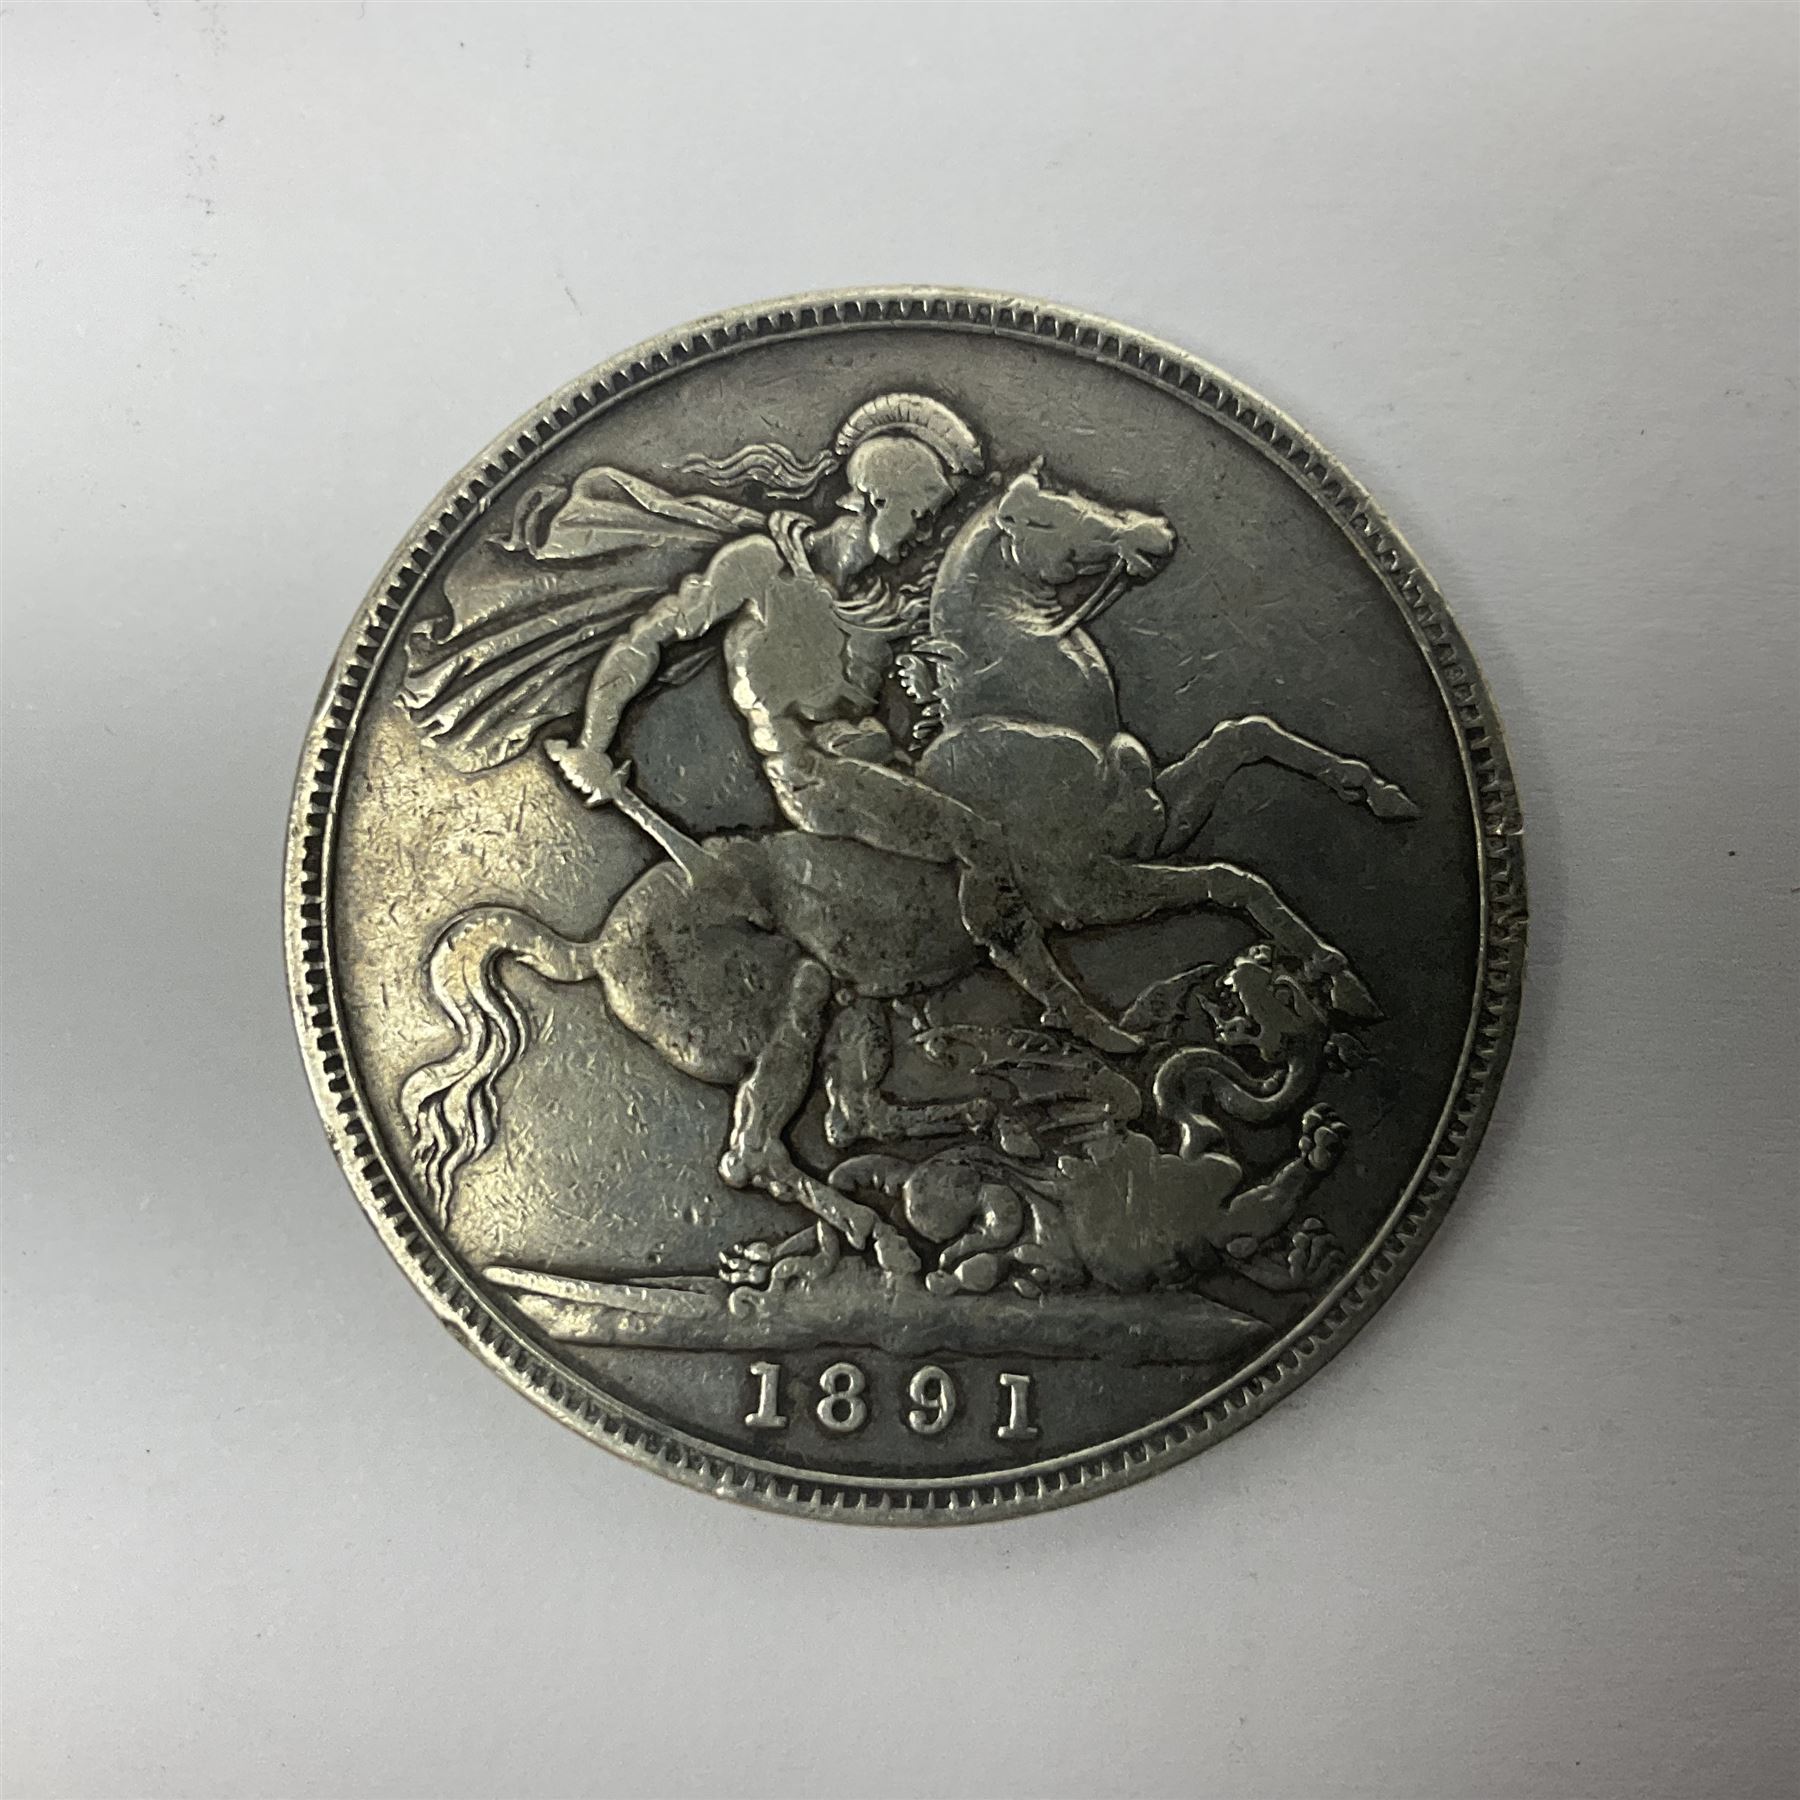 Queen Victoria 1891 crown coin - Image 4 of 4